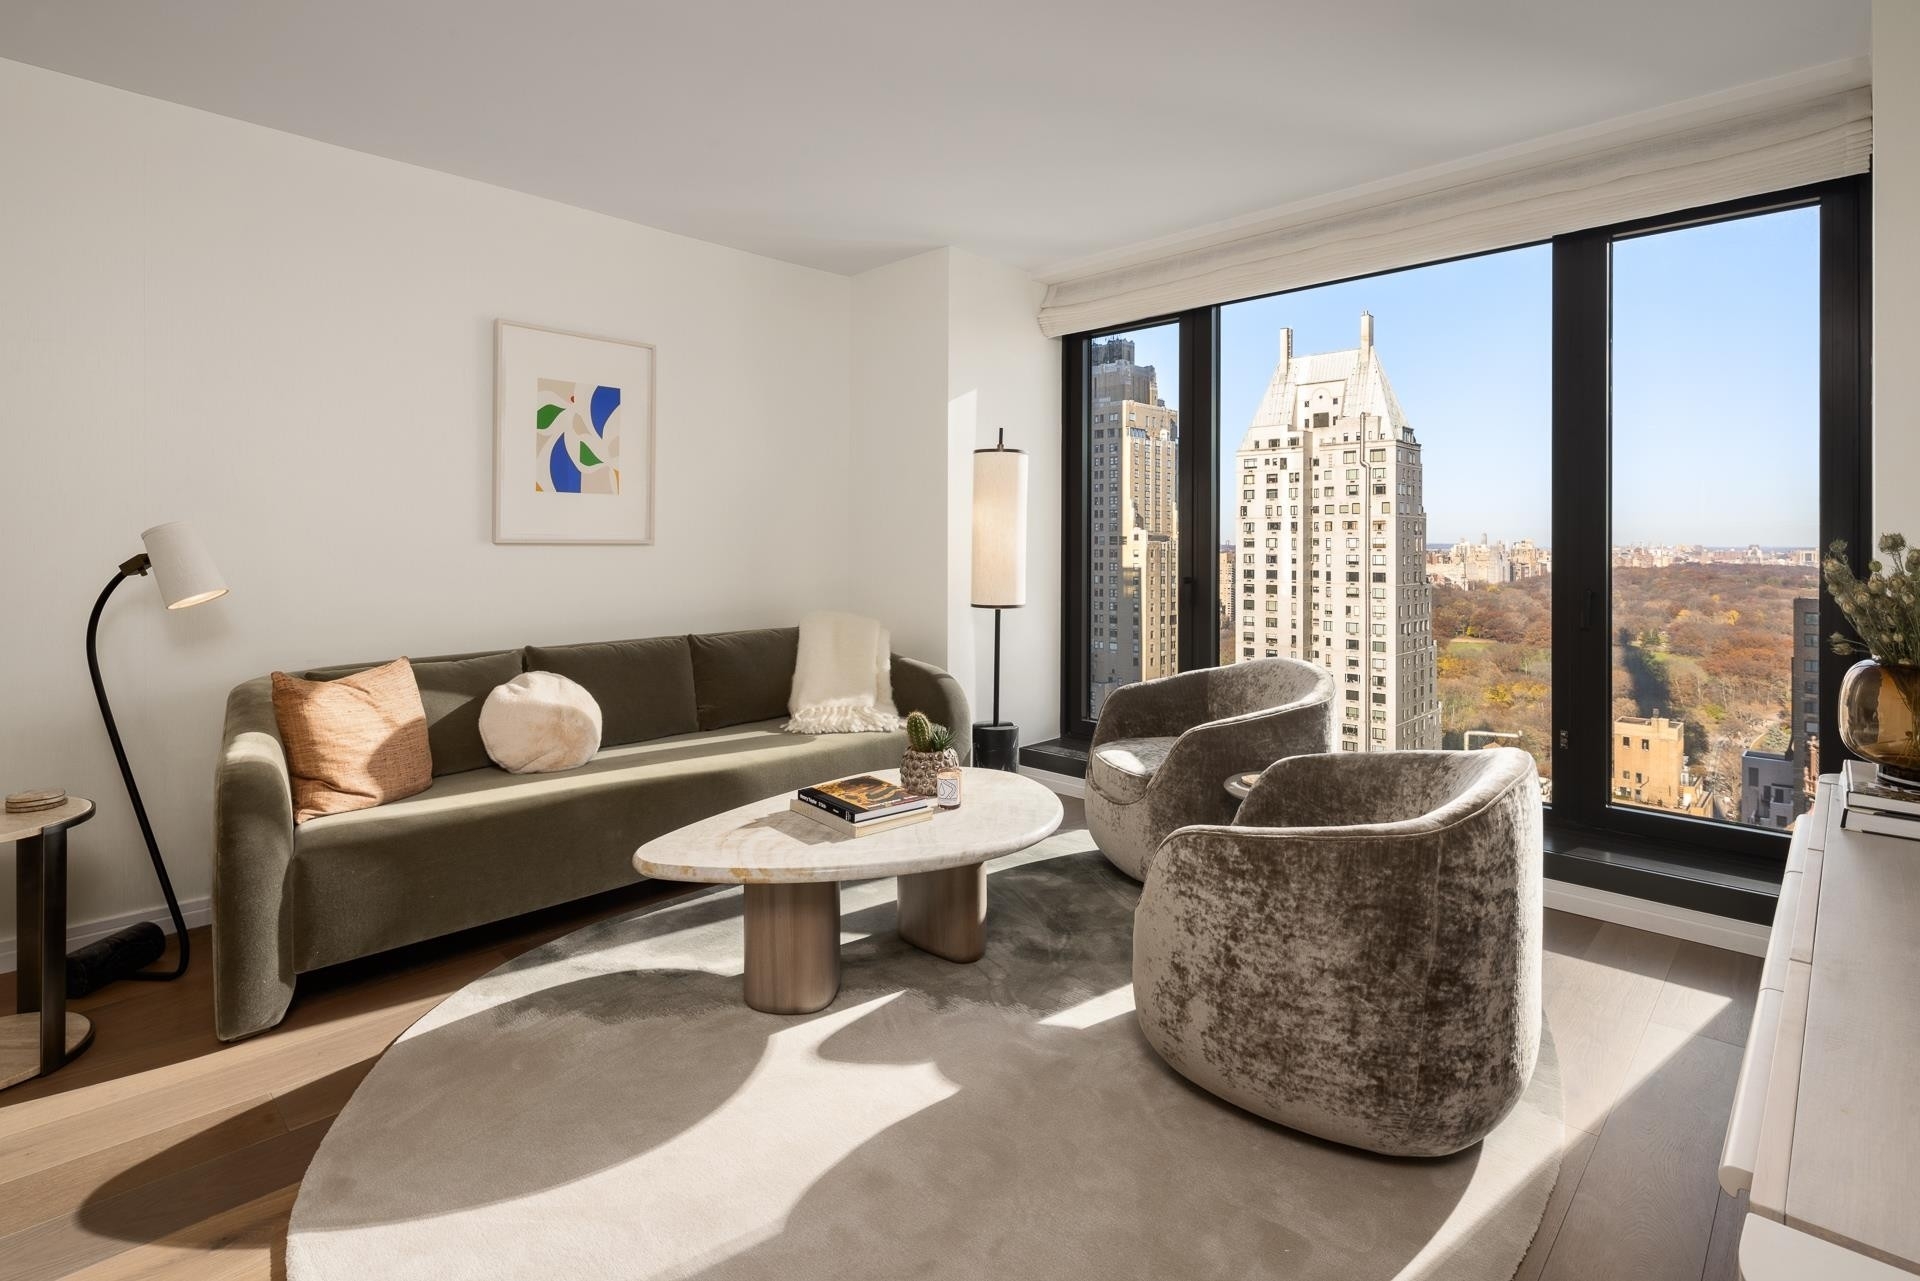 1. Condominiums for Sale at One11, 111 W 56TH ST, PHD Midtown West, New York, New York 10019